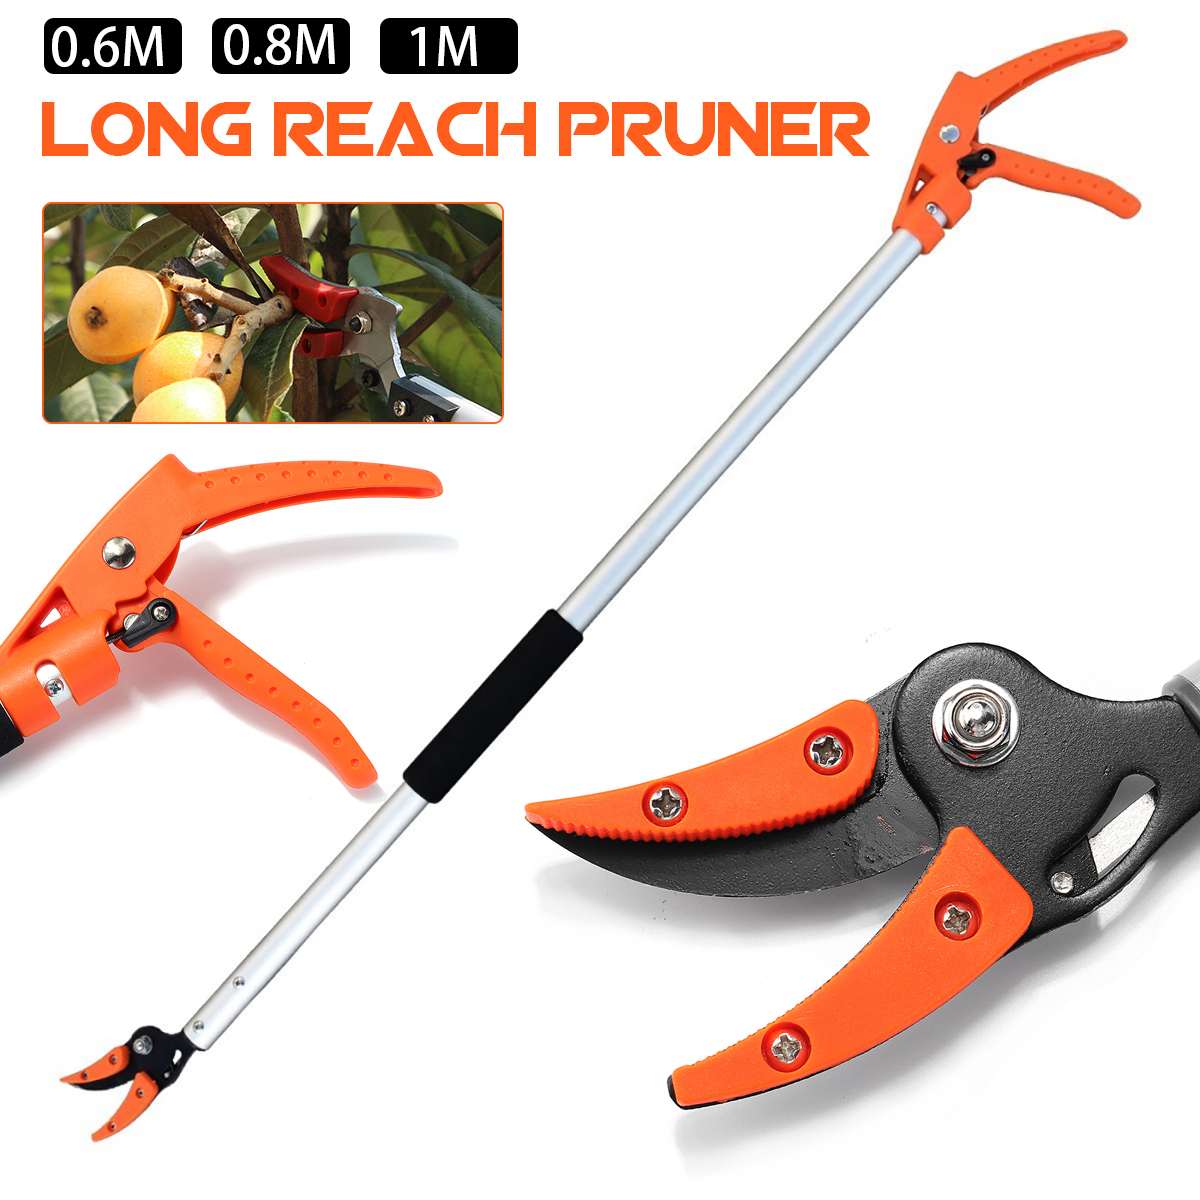 2.2m Extra Long Reach Pruner Cut and Hold Bypass Pruner Max Cutting 1/2 inch 